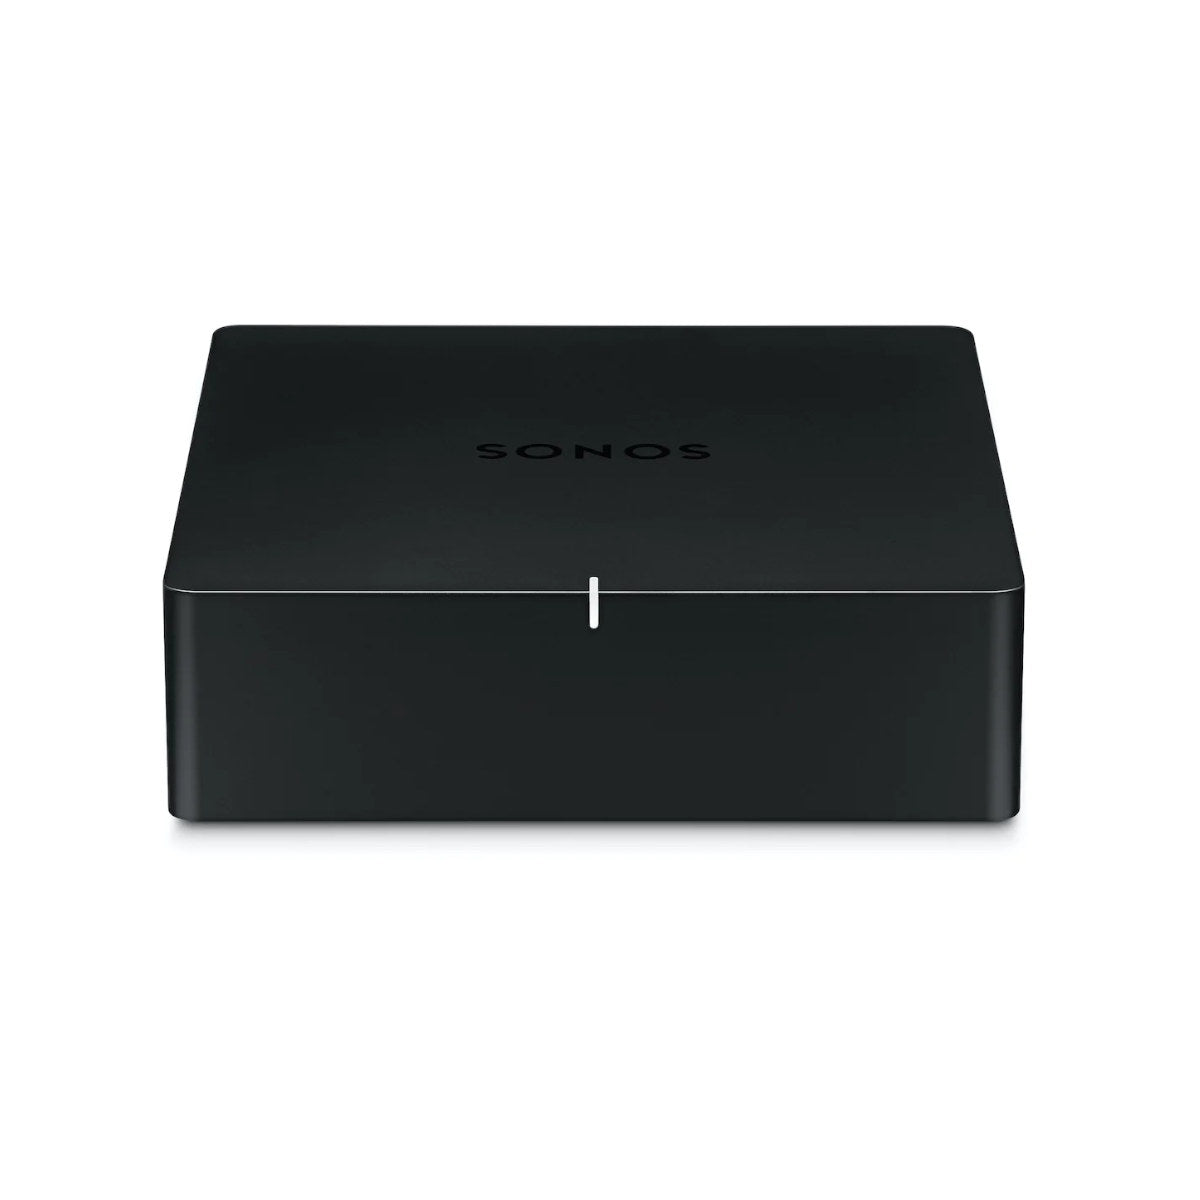 Sonos Port - The Streaming Music Stereo Upgrade for Your Stereo or Receiver